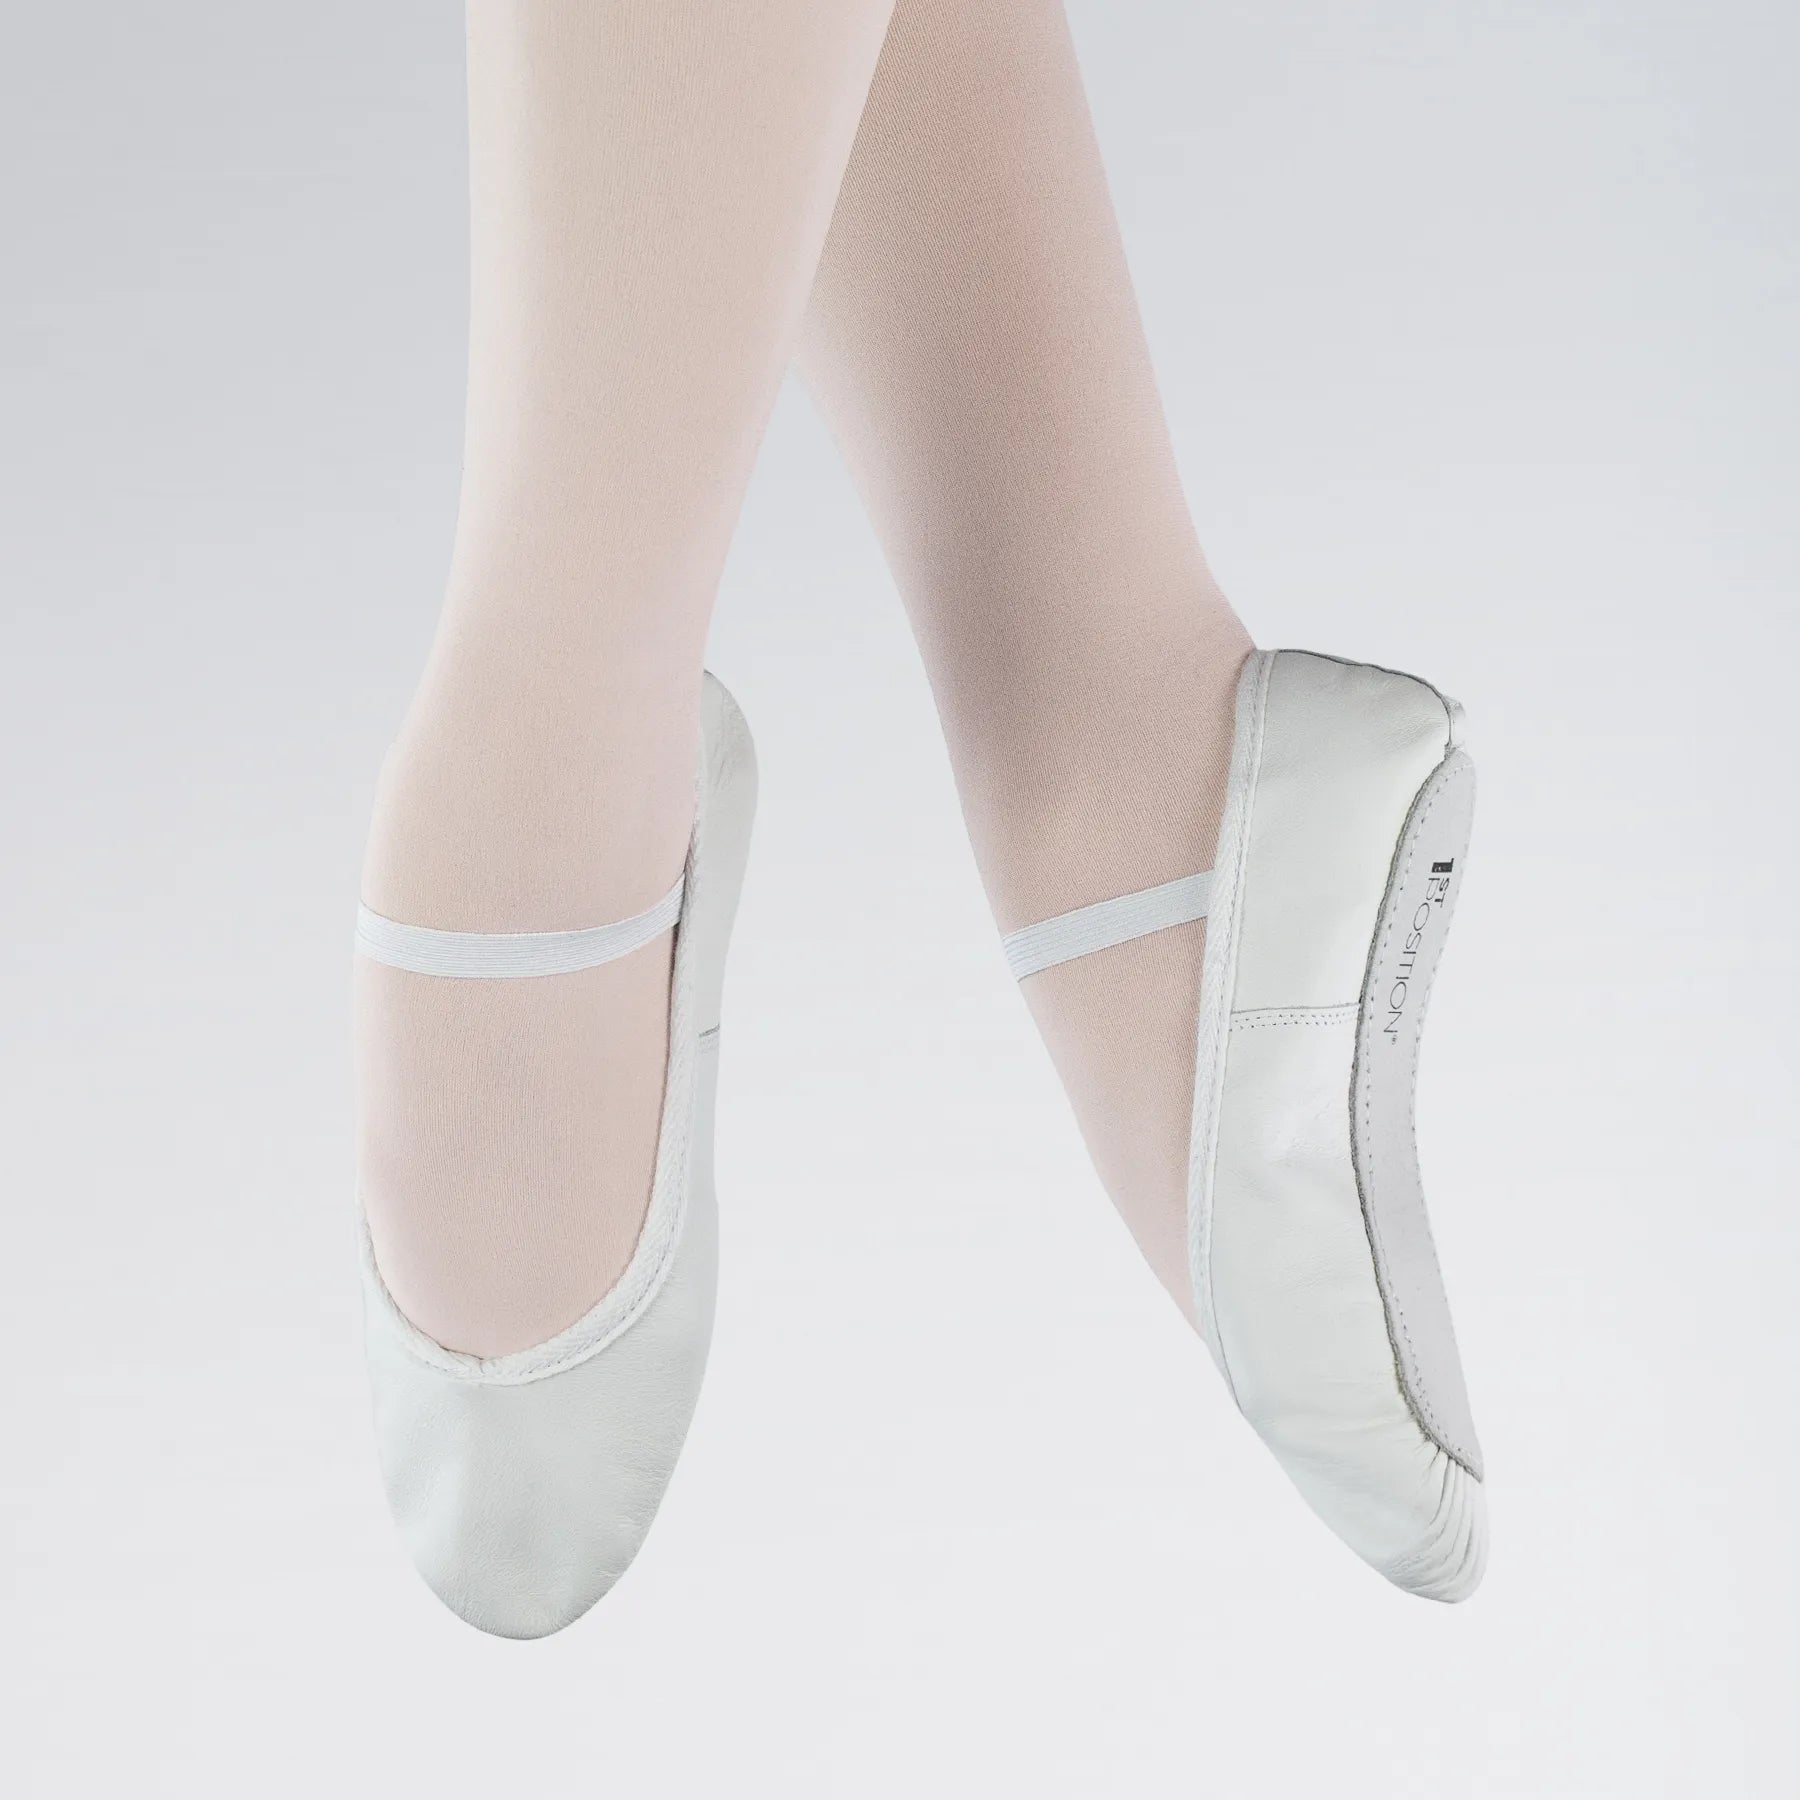 1st Position Leather Ballet Shoes - White